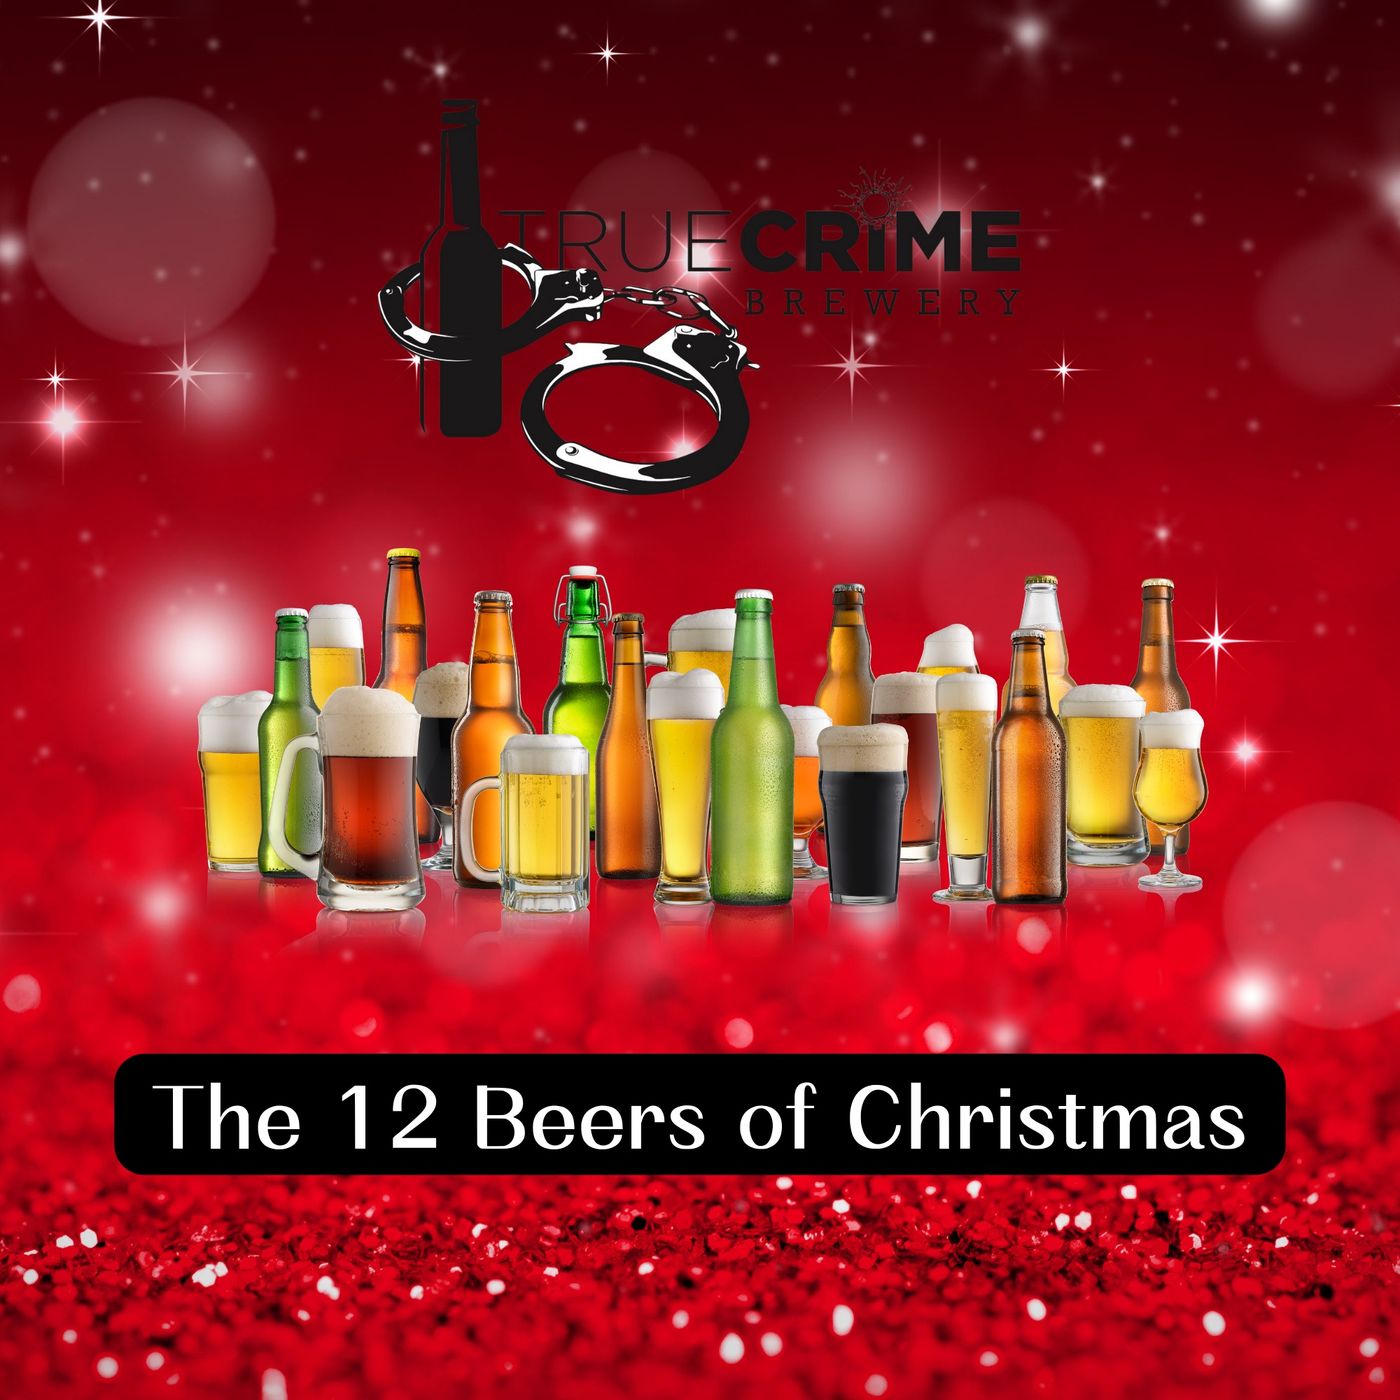 The 12 Beers of Christmas: Domestic Violence During the Holidays